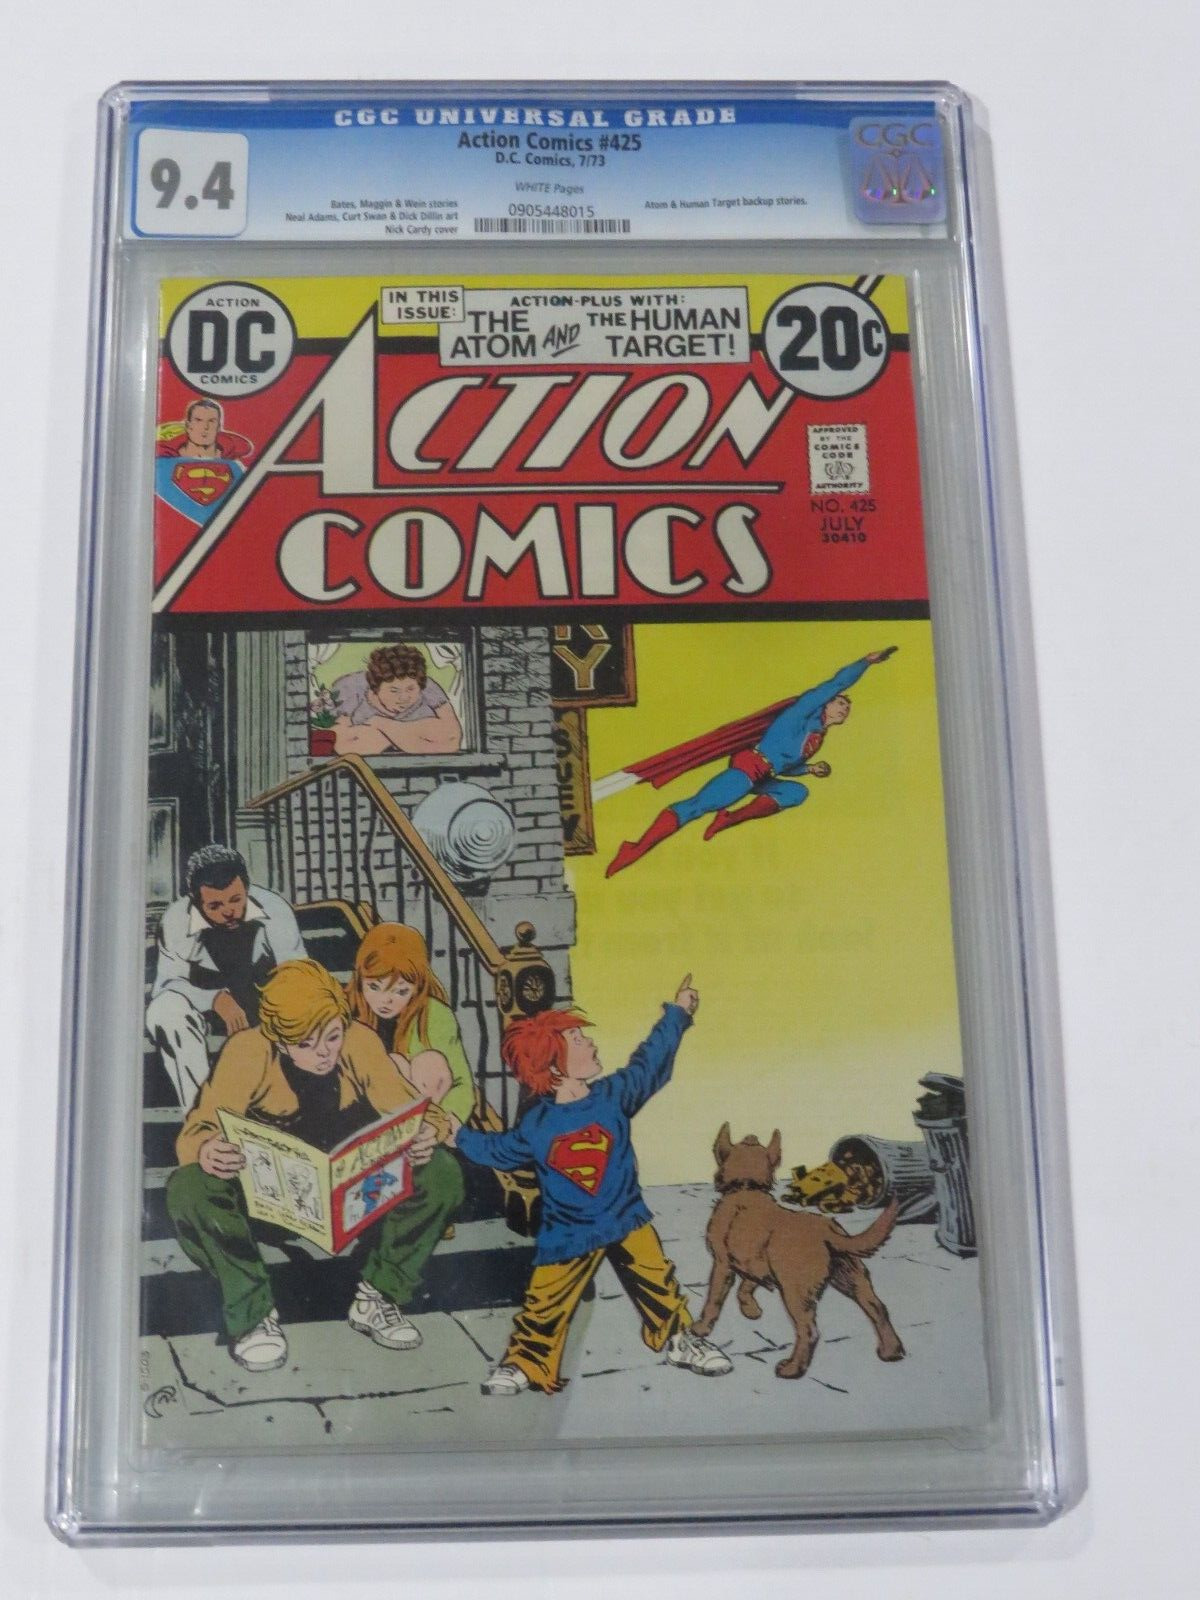 Action Comics #425 & 466 both CGC 9.4  great covers you get both books